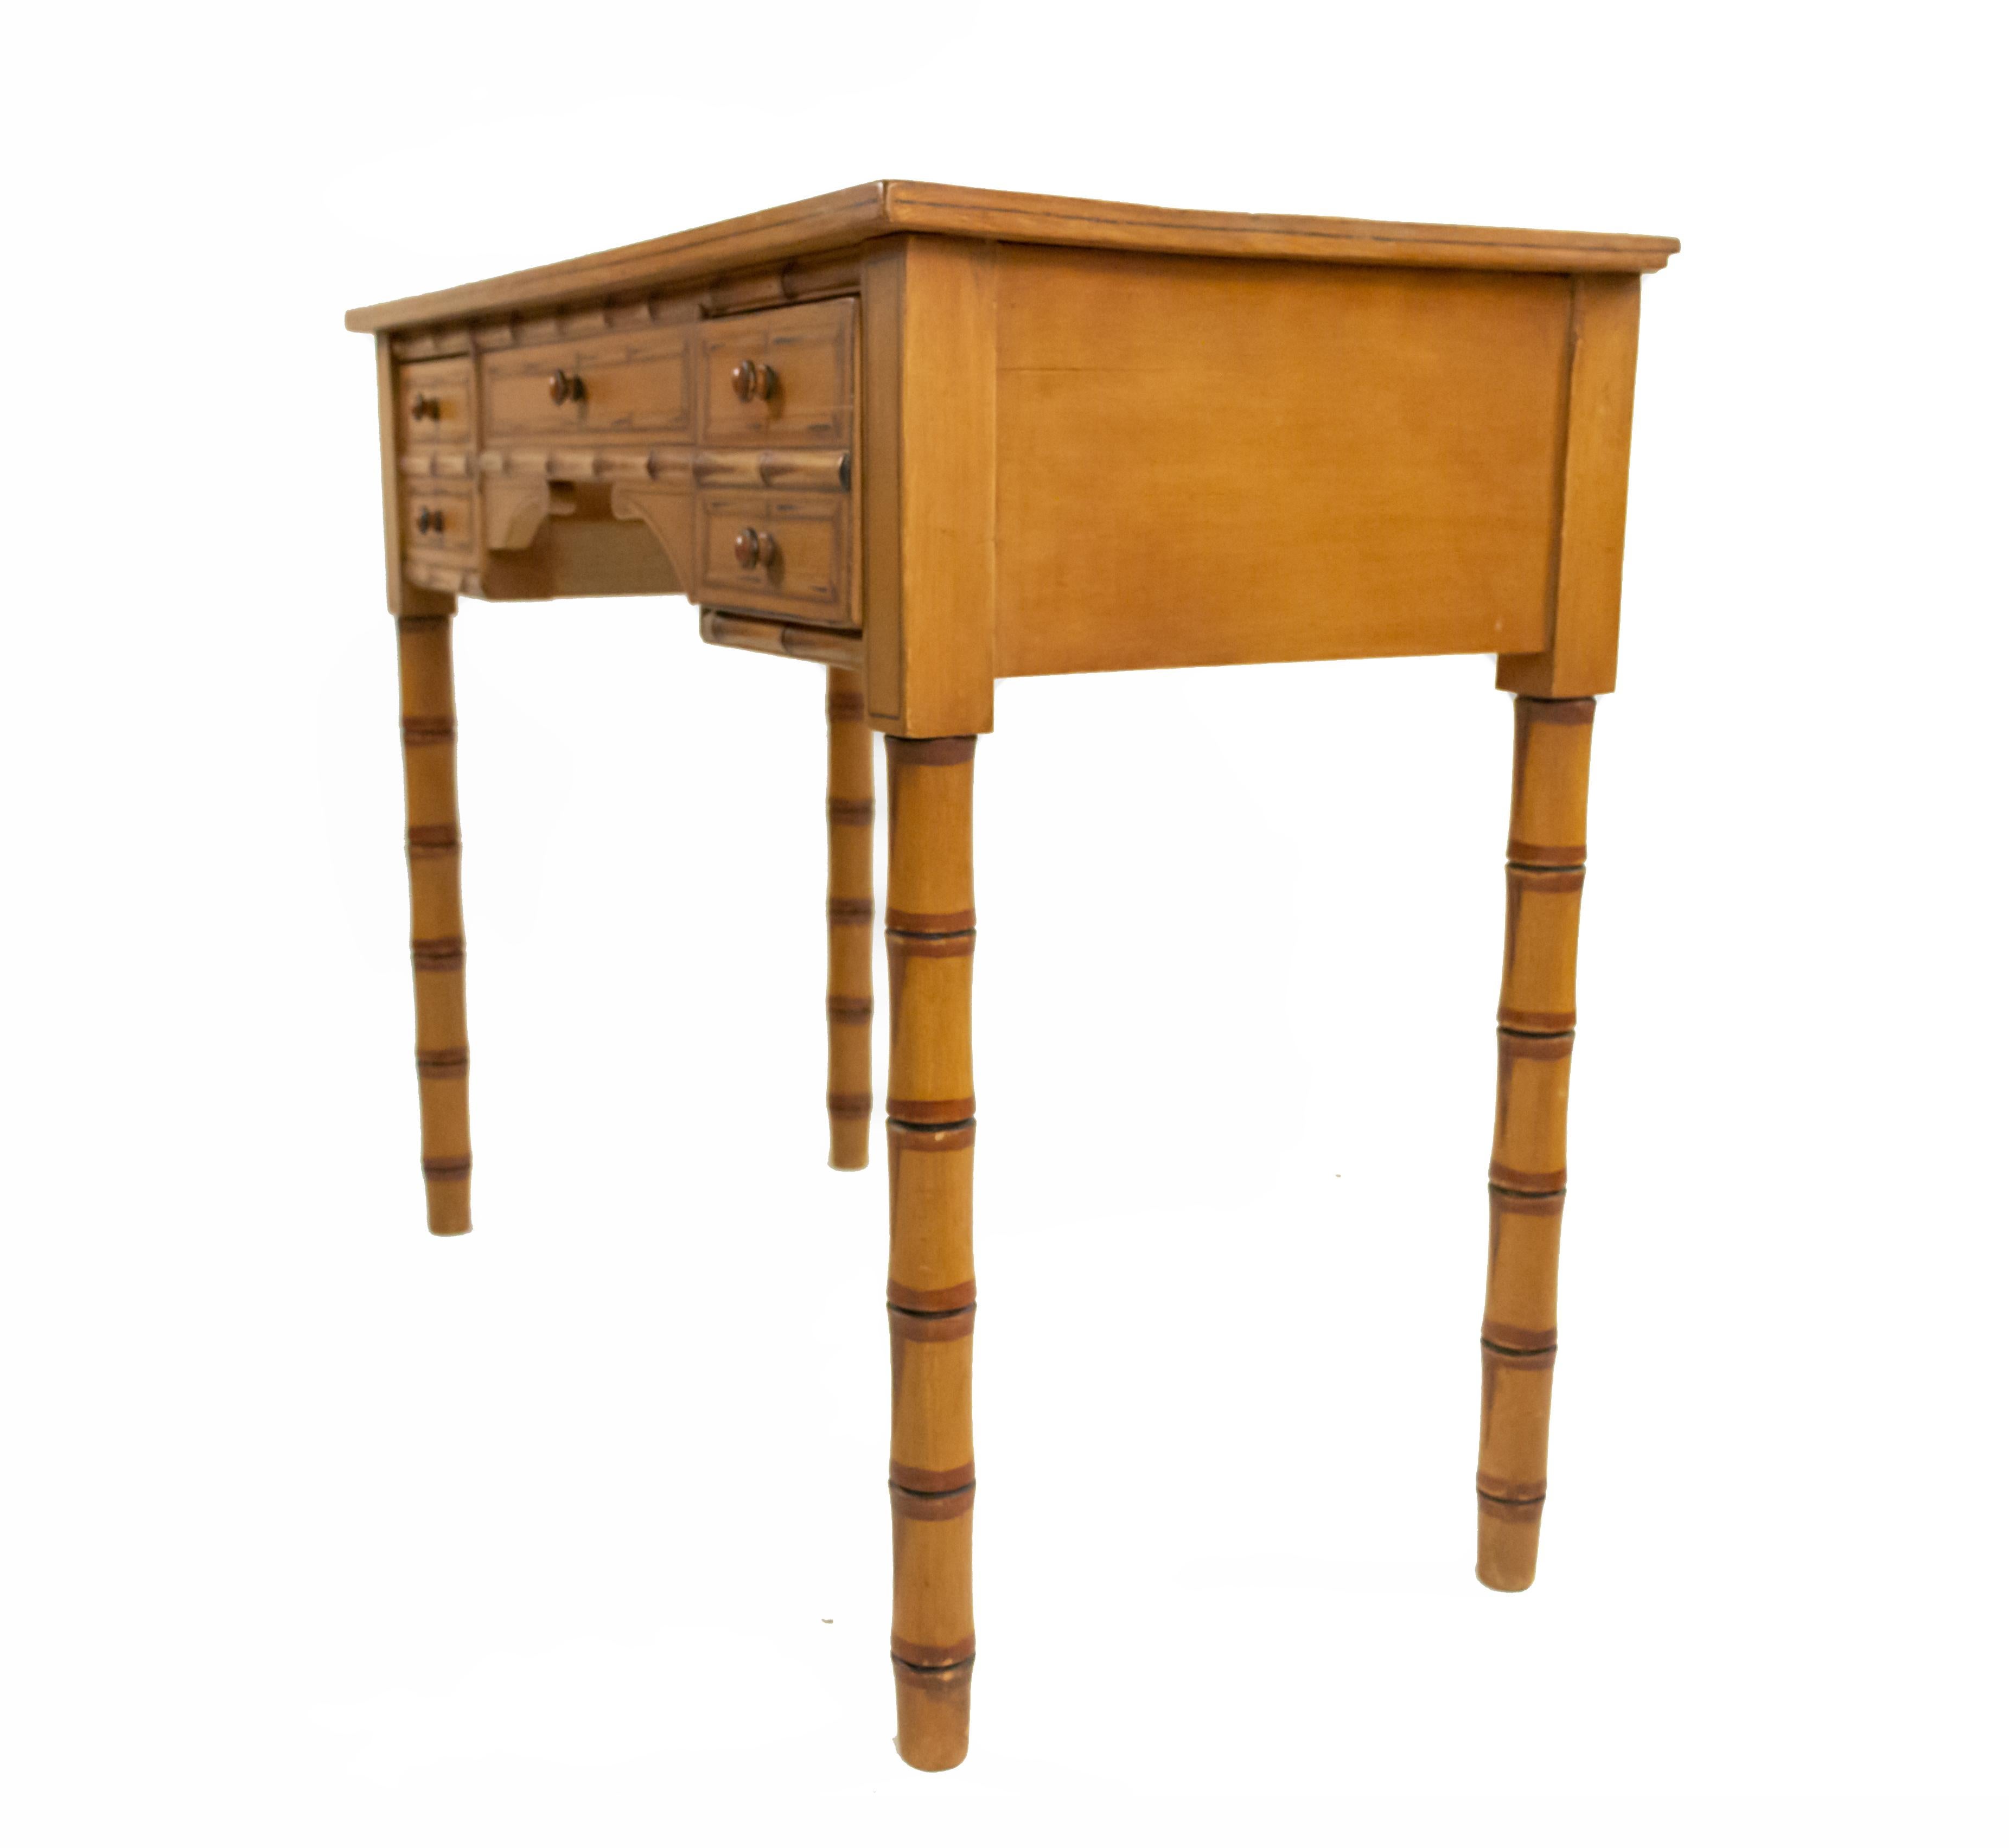 English Regency style faux bamboo painted desk with two side drawers centering a dummy drawer.